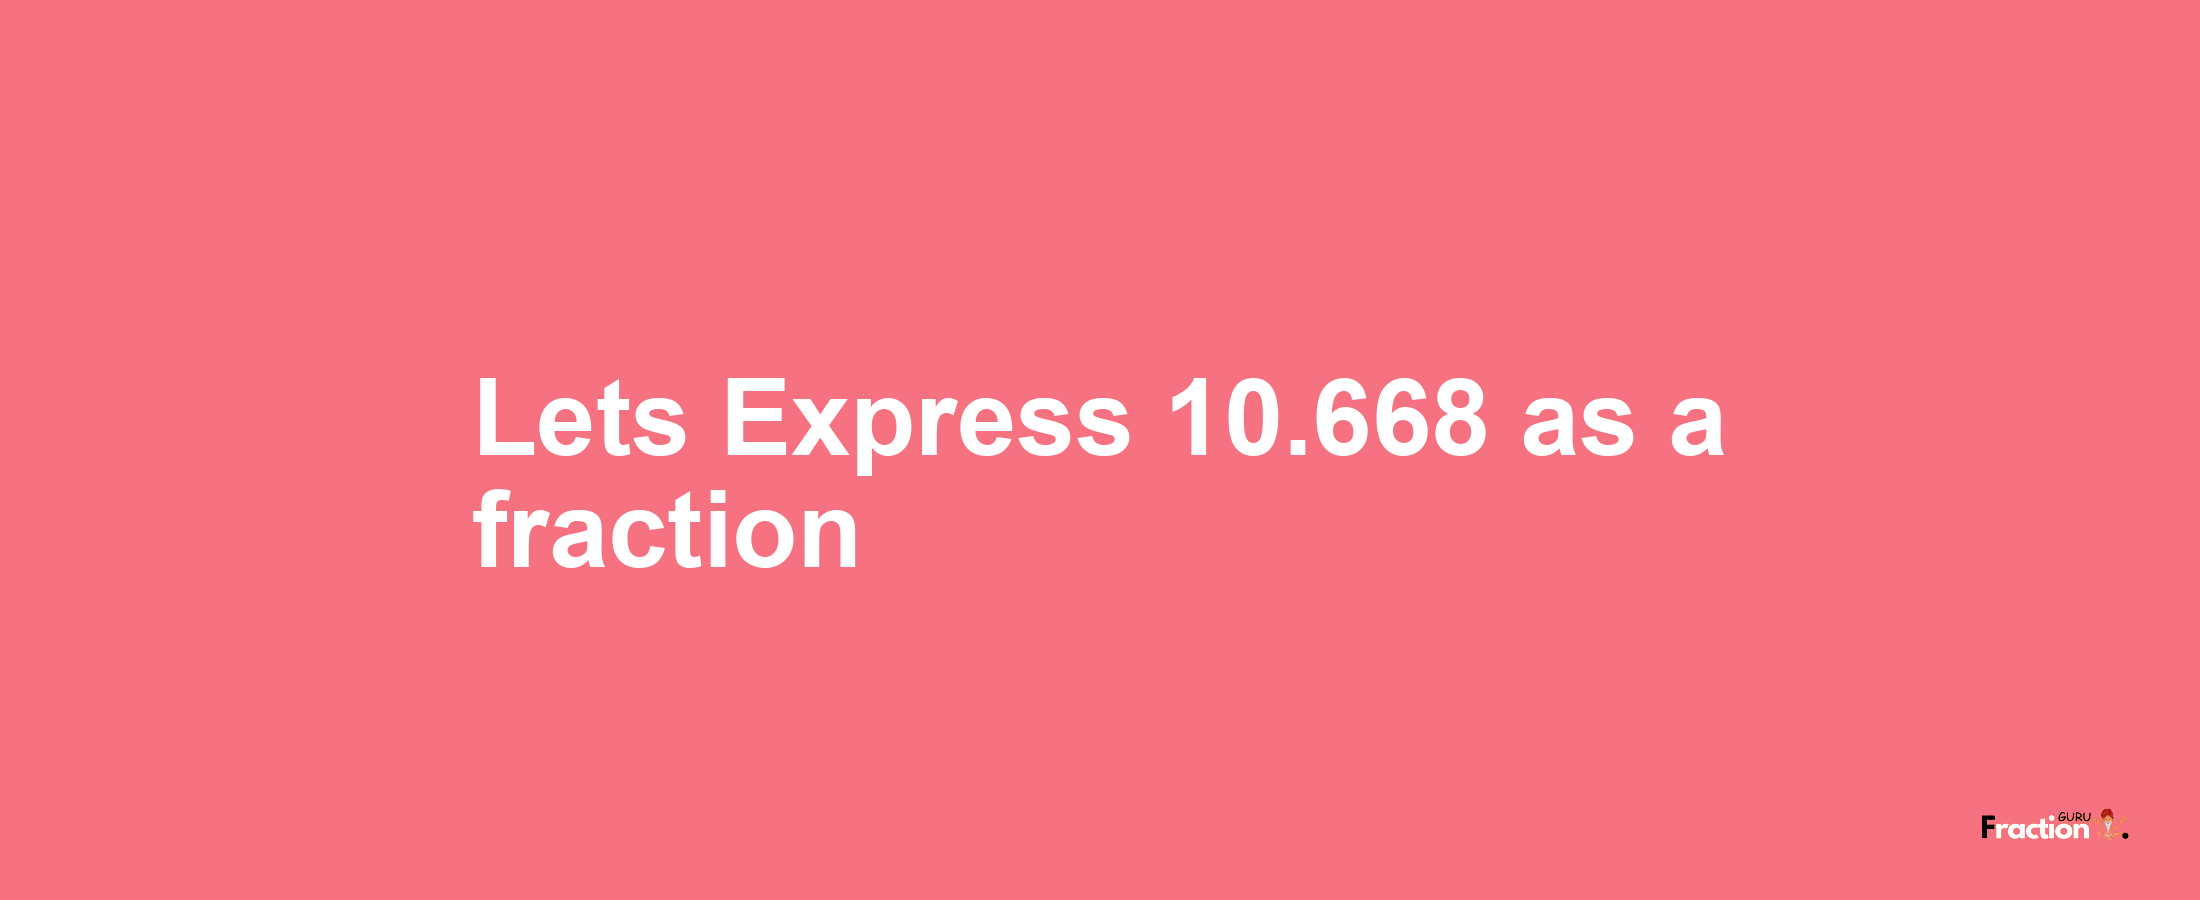 Lets Express 10.668 as afraction